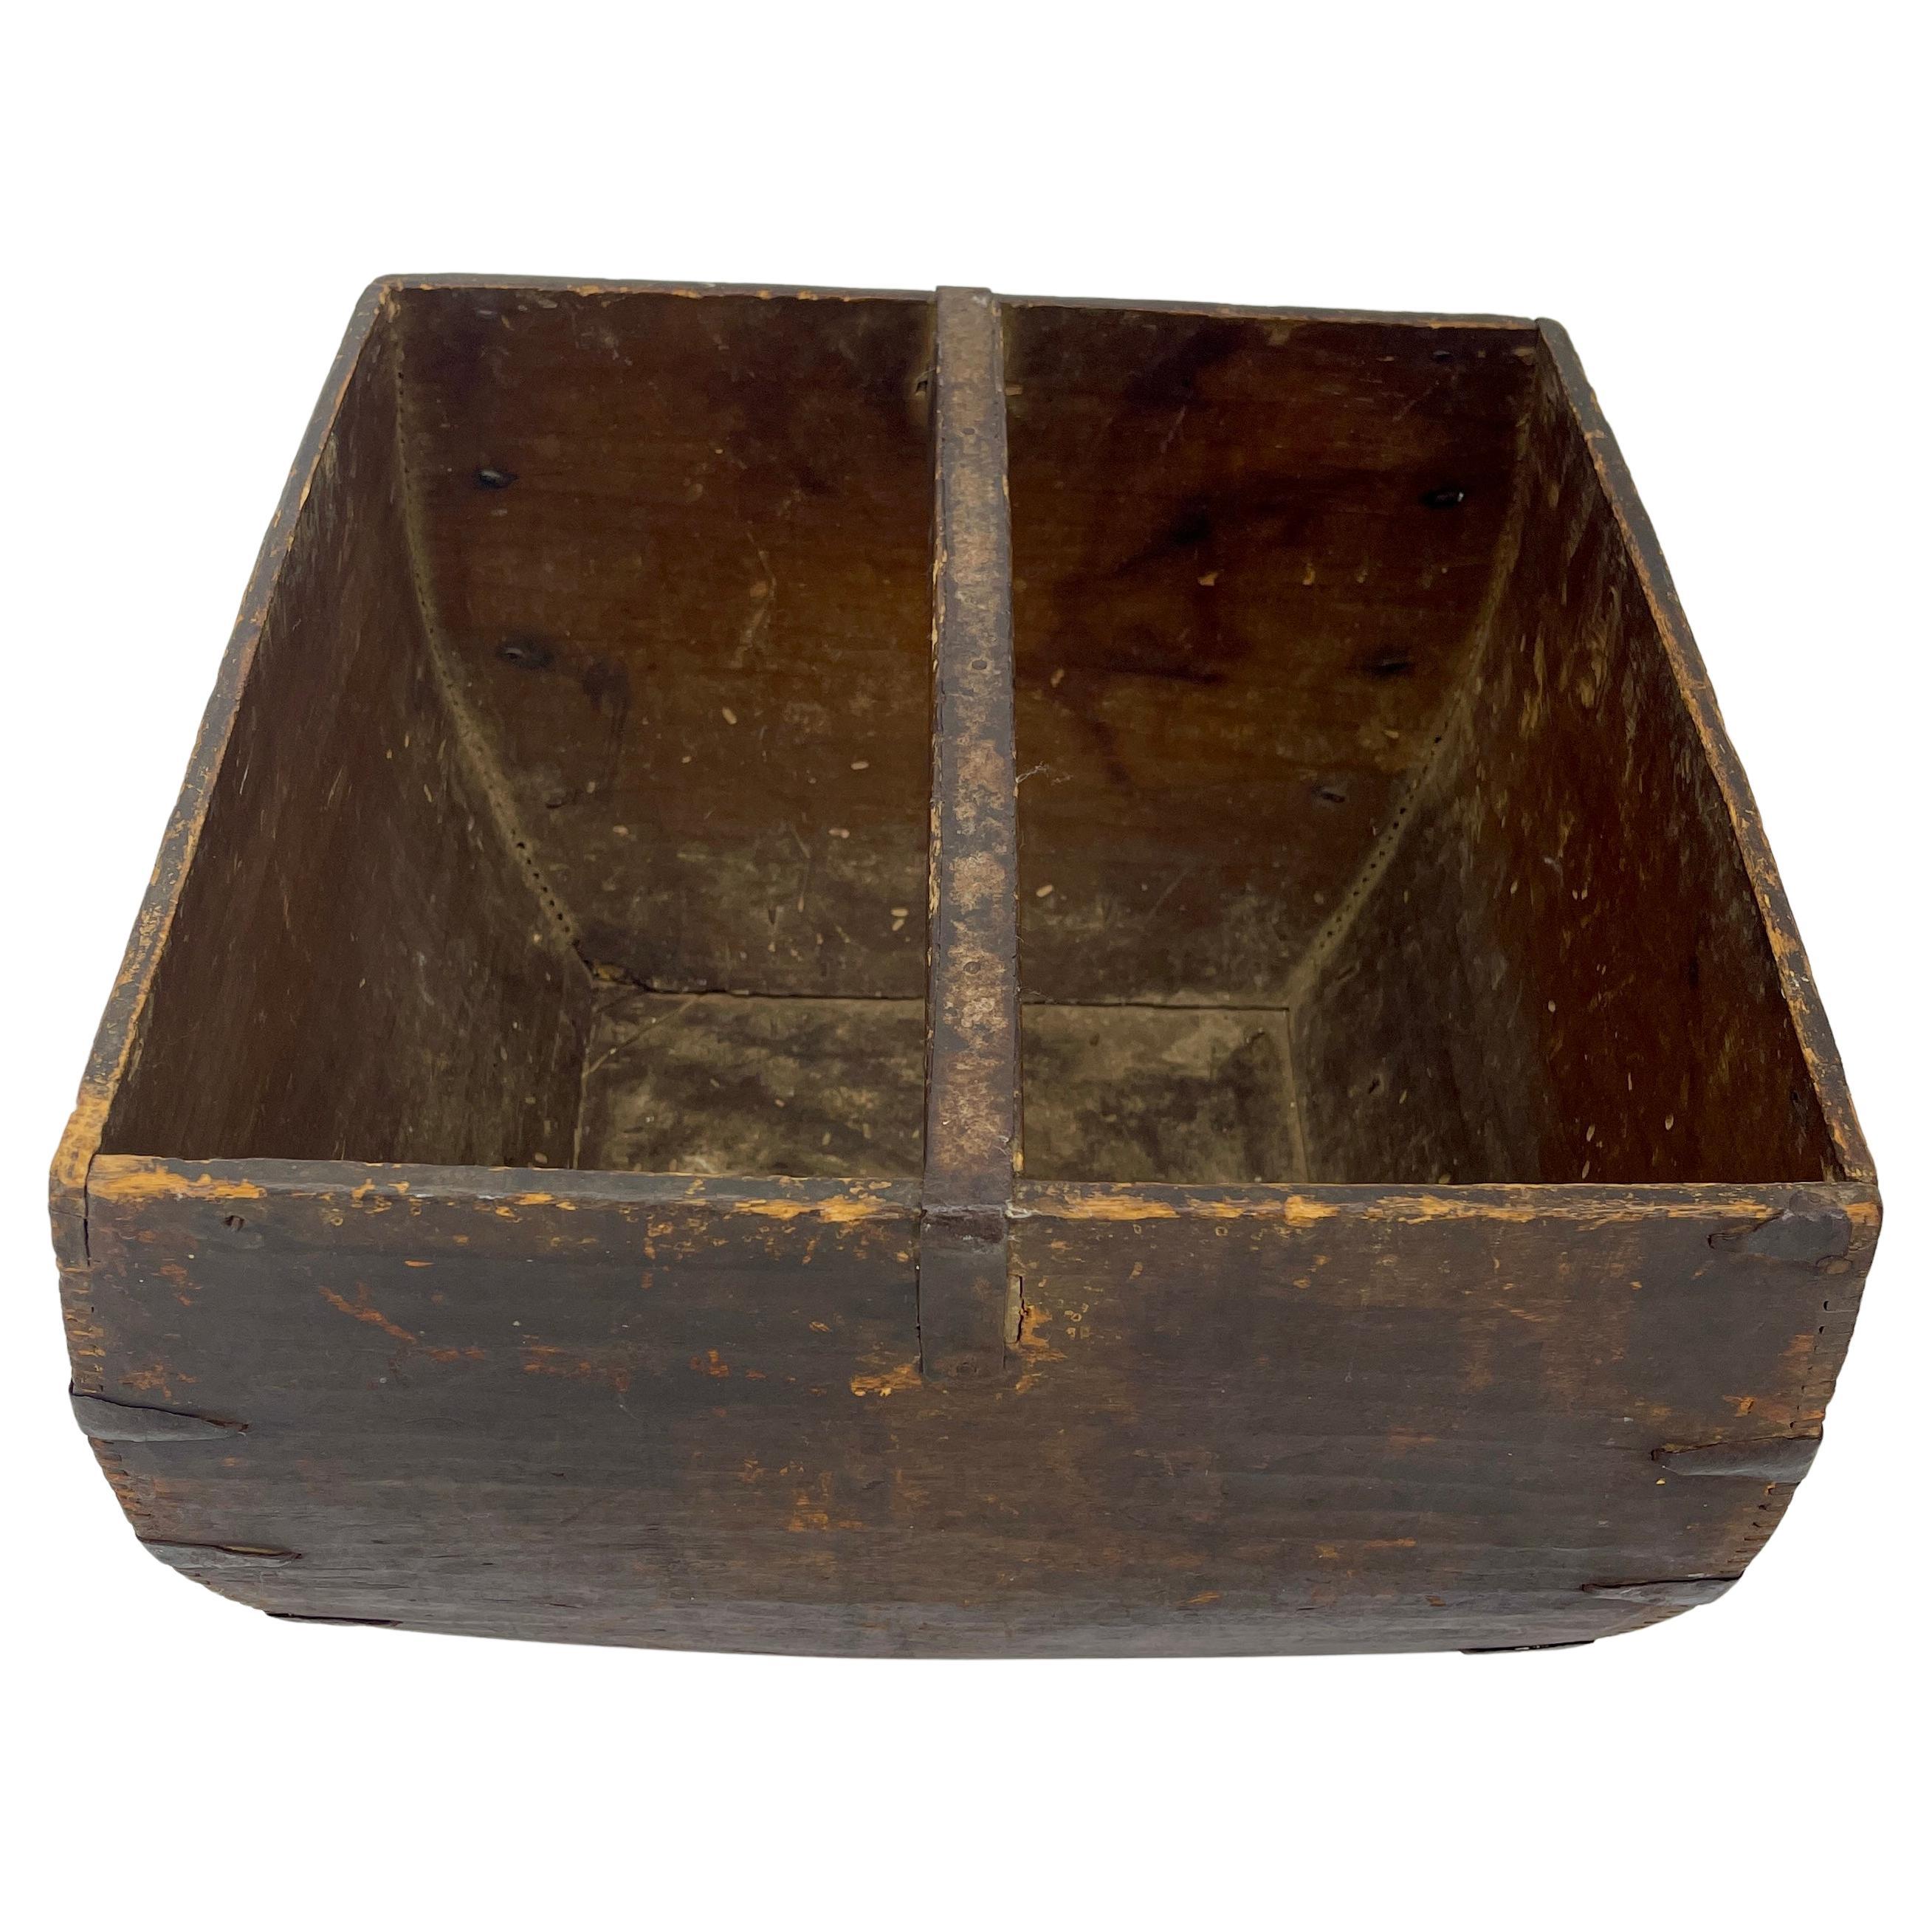 Hand-Crafted Antique Wooden Box or Crate with Handle